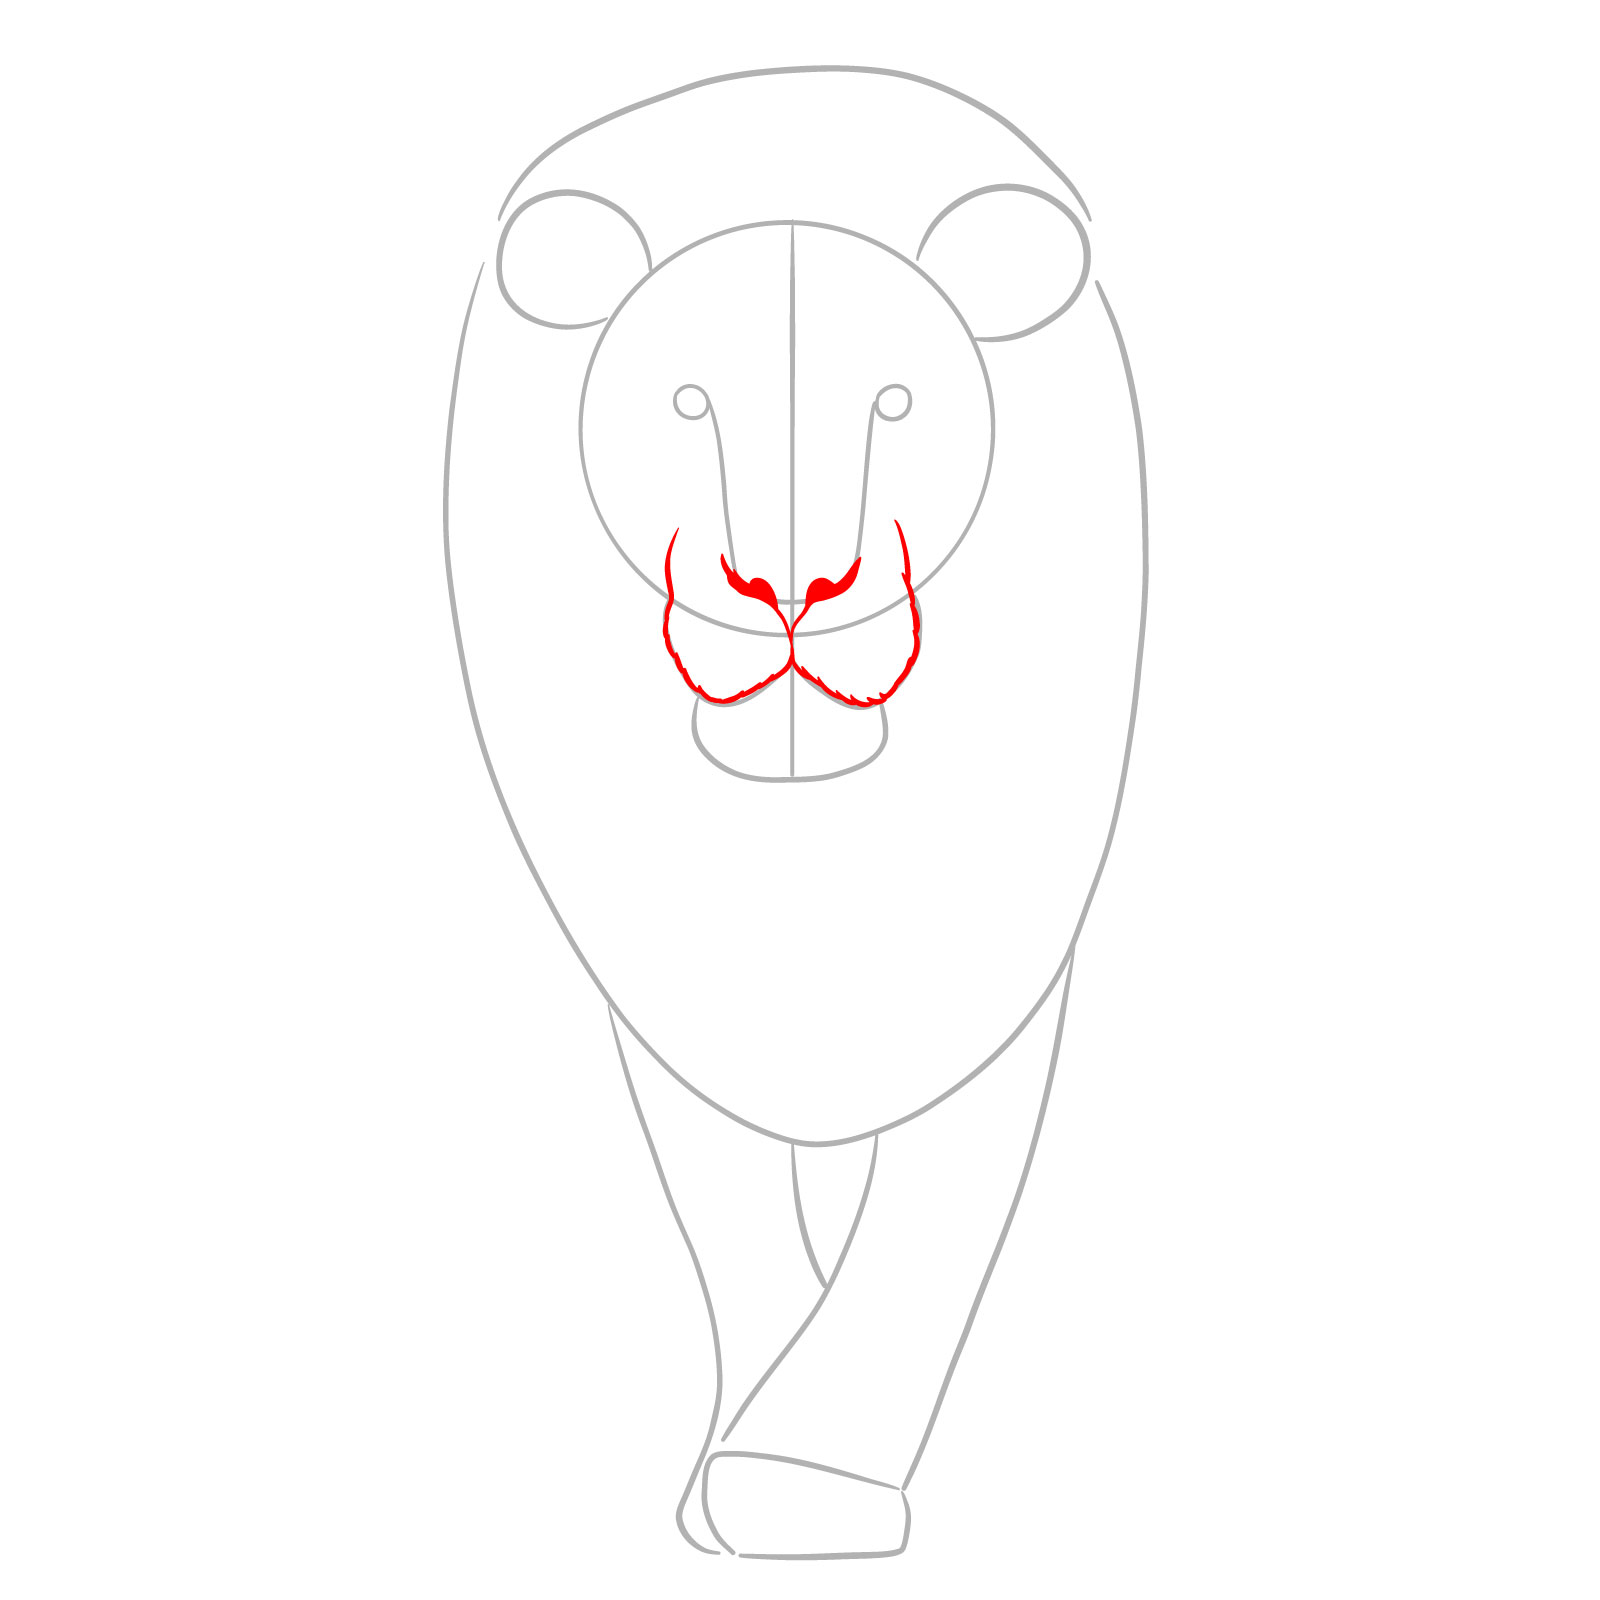 Detailing the nose and upper jaw of a walking lion sketch - step 03